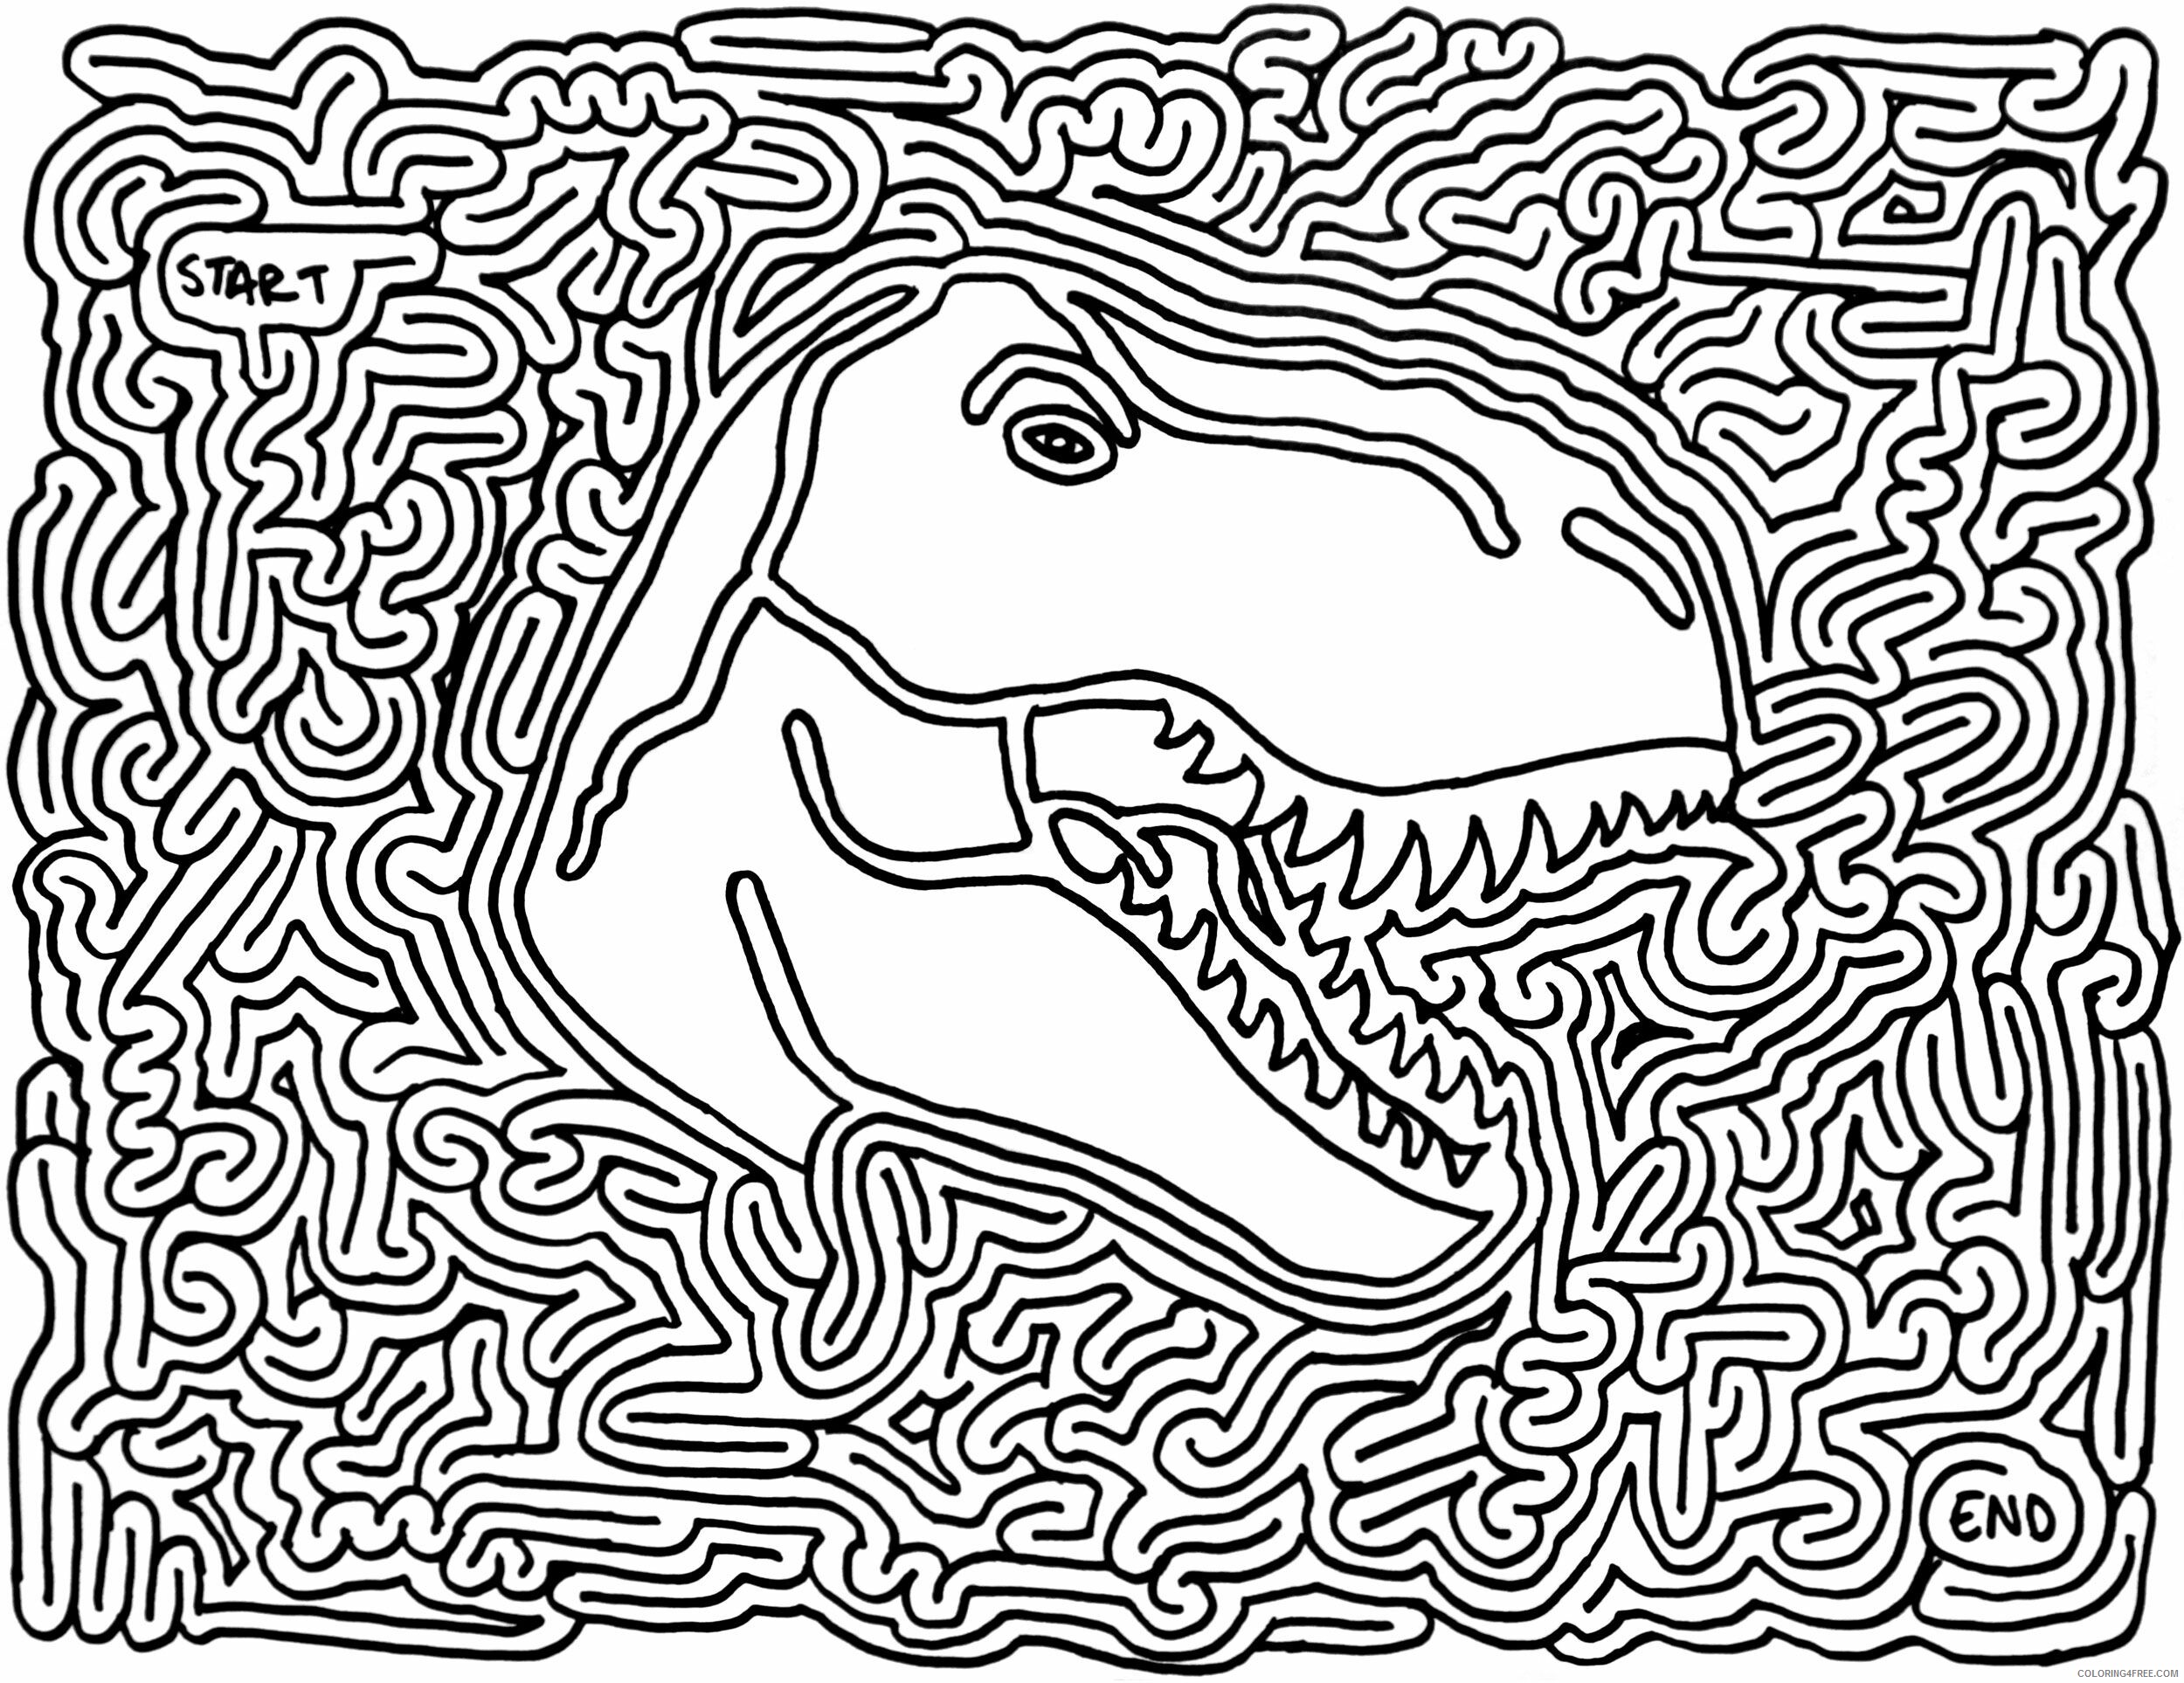 Puzzle Coloring Pages Dinosaur Maze Puzzle Printable 2021 4949 Coloring4free